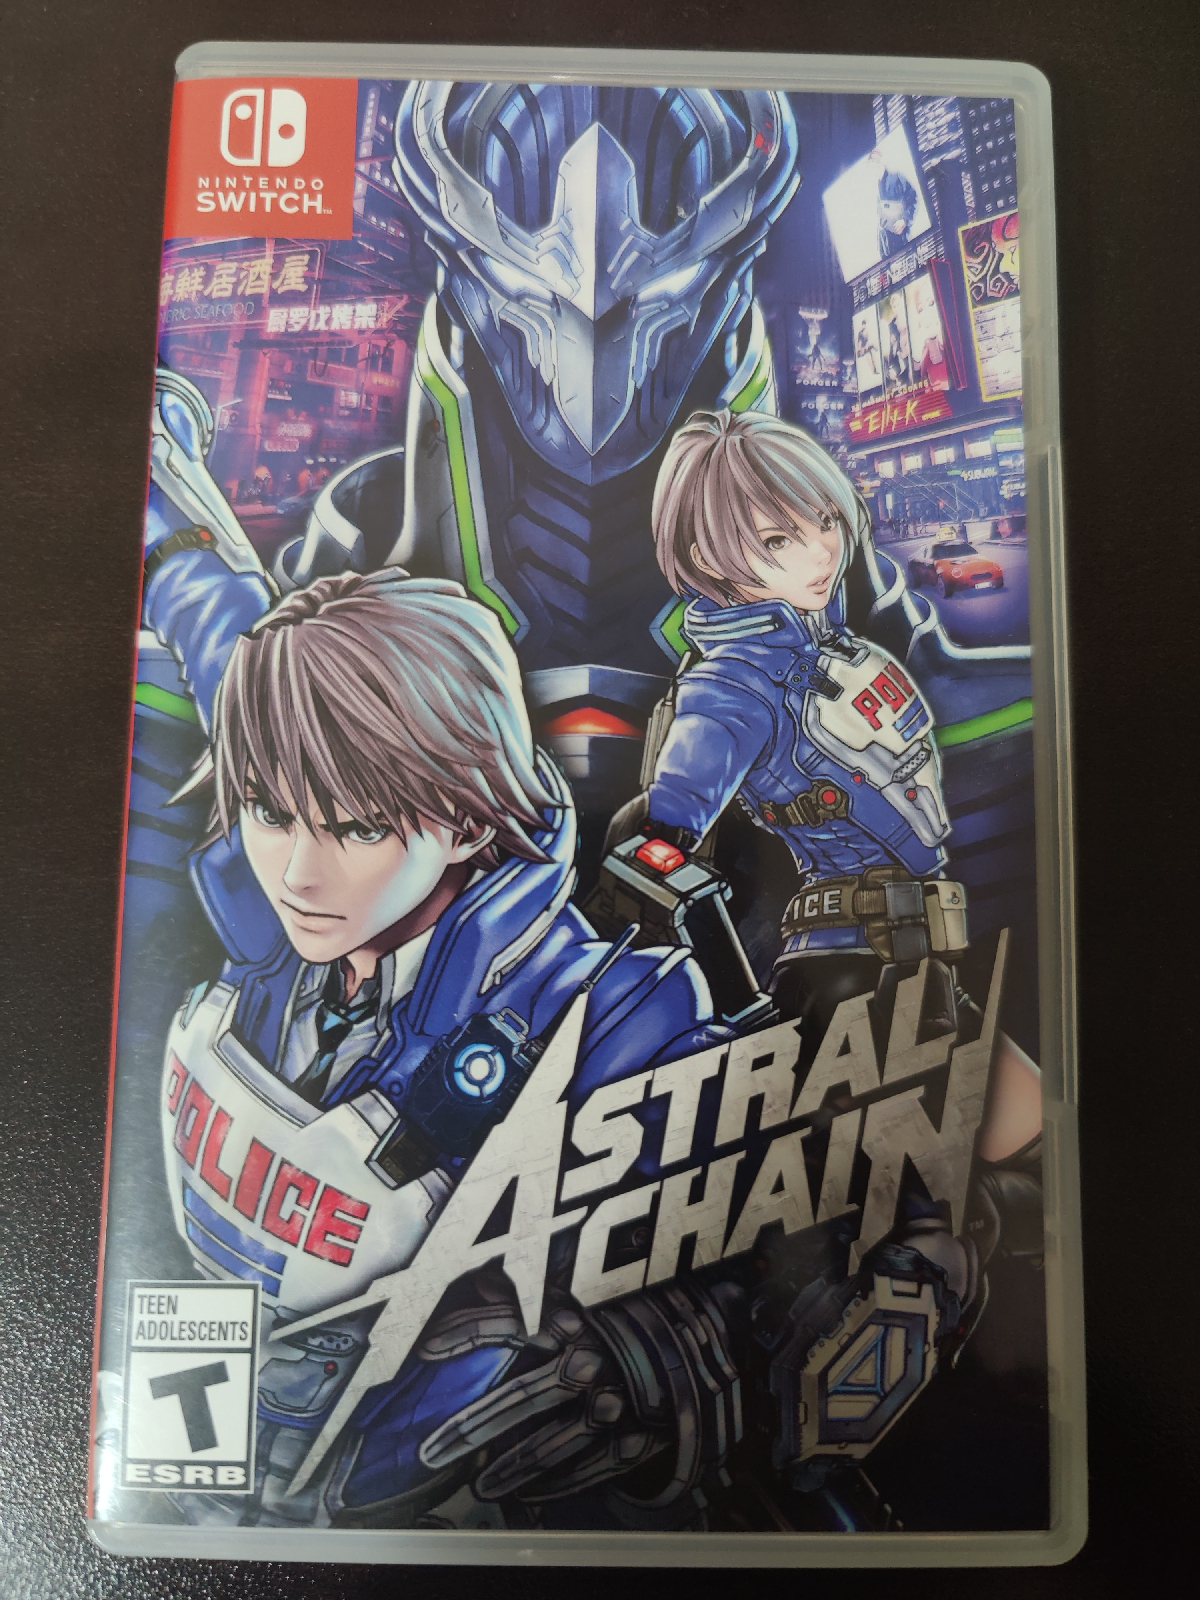 Cultured Individual Astral Chain A Dystopian Nintendo Switch Experience